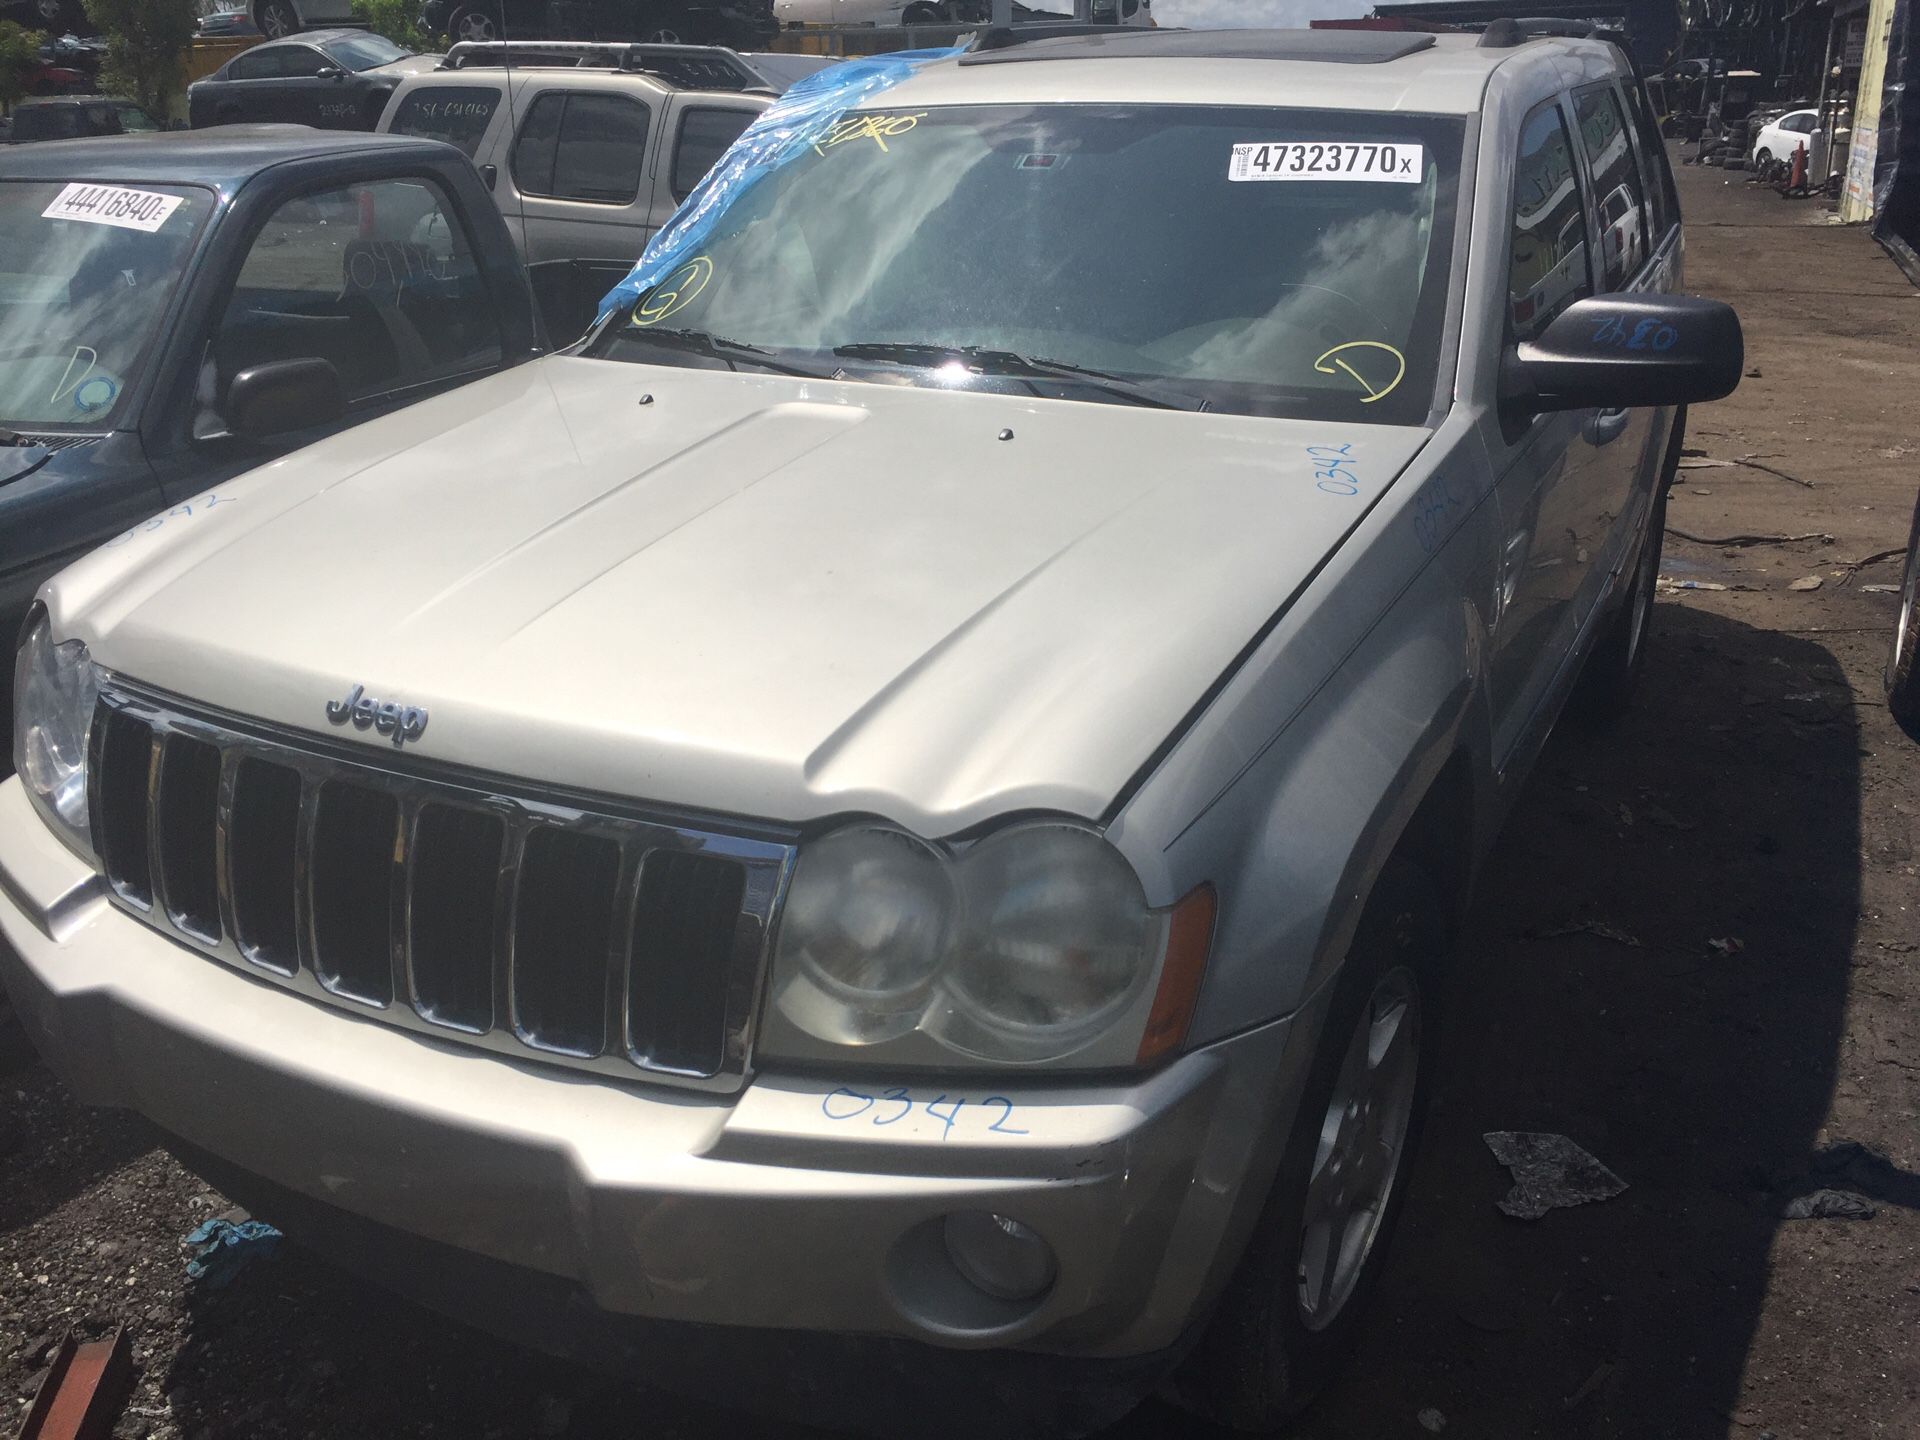 Jeep cherokee limited 2007 parts out text